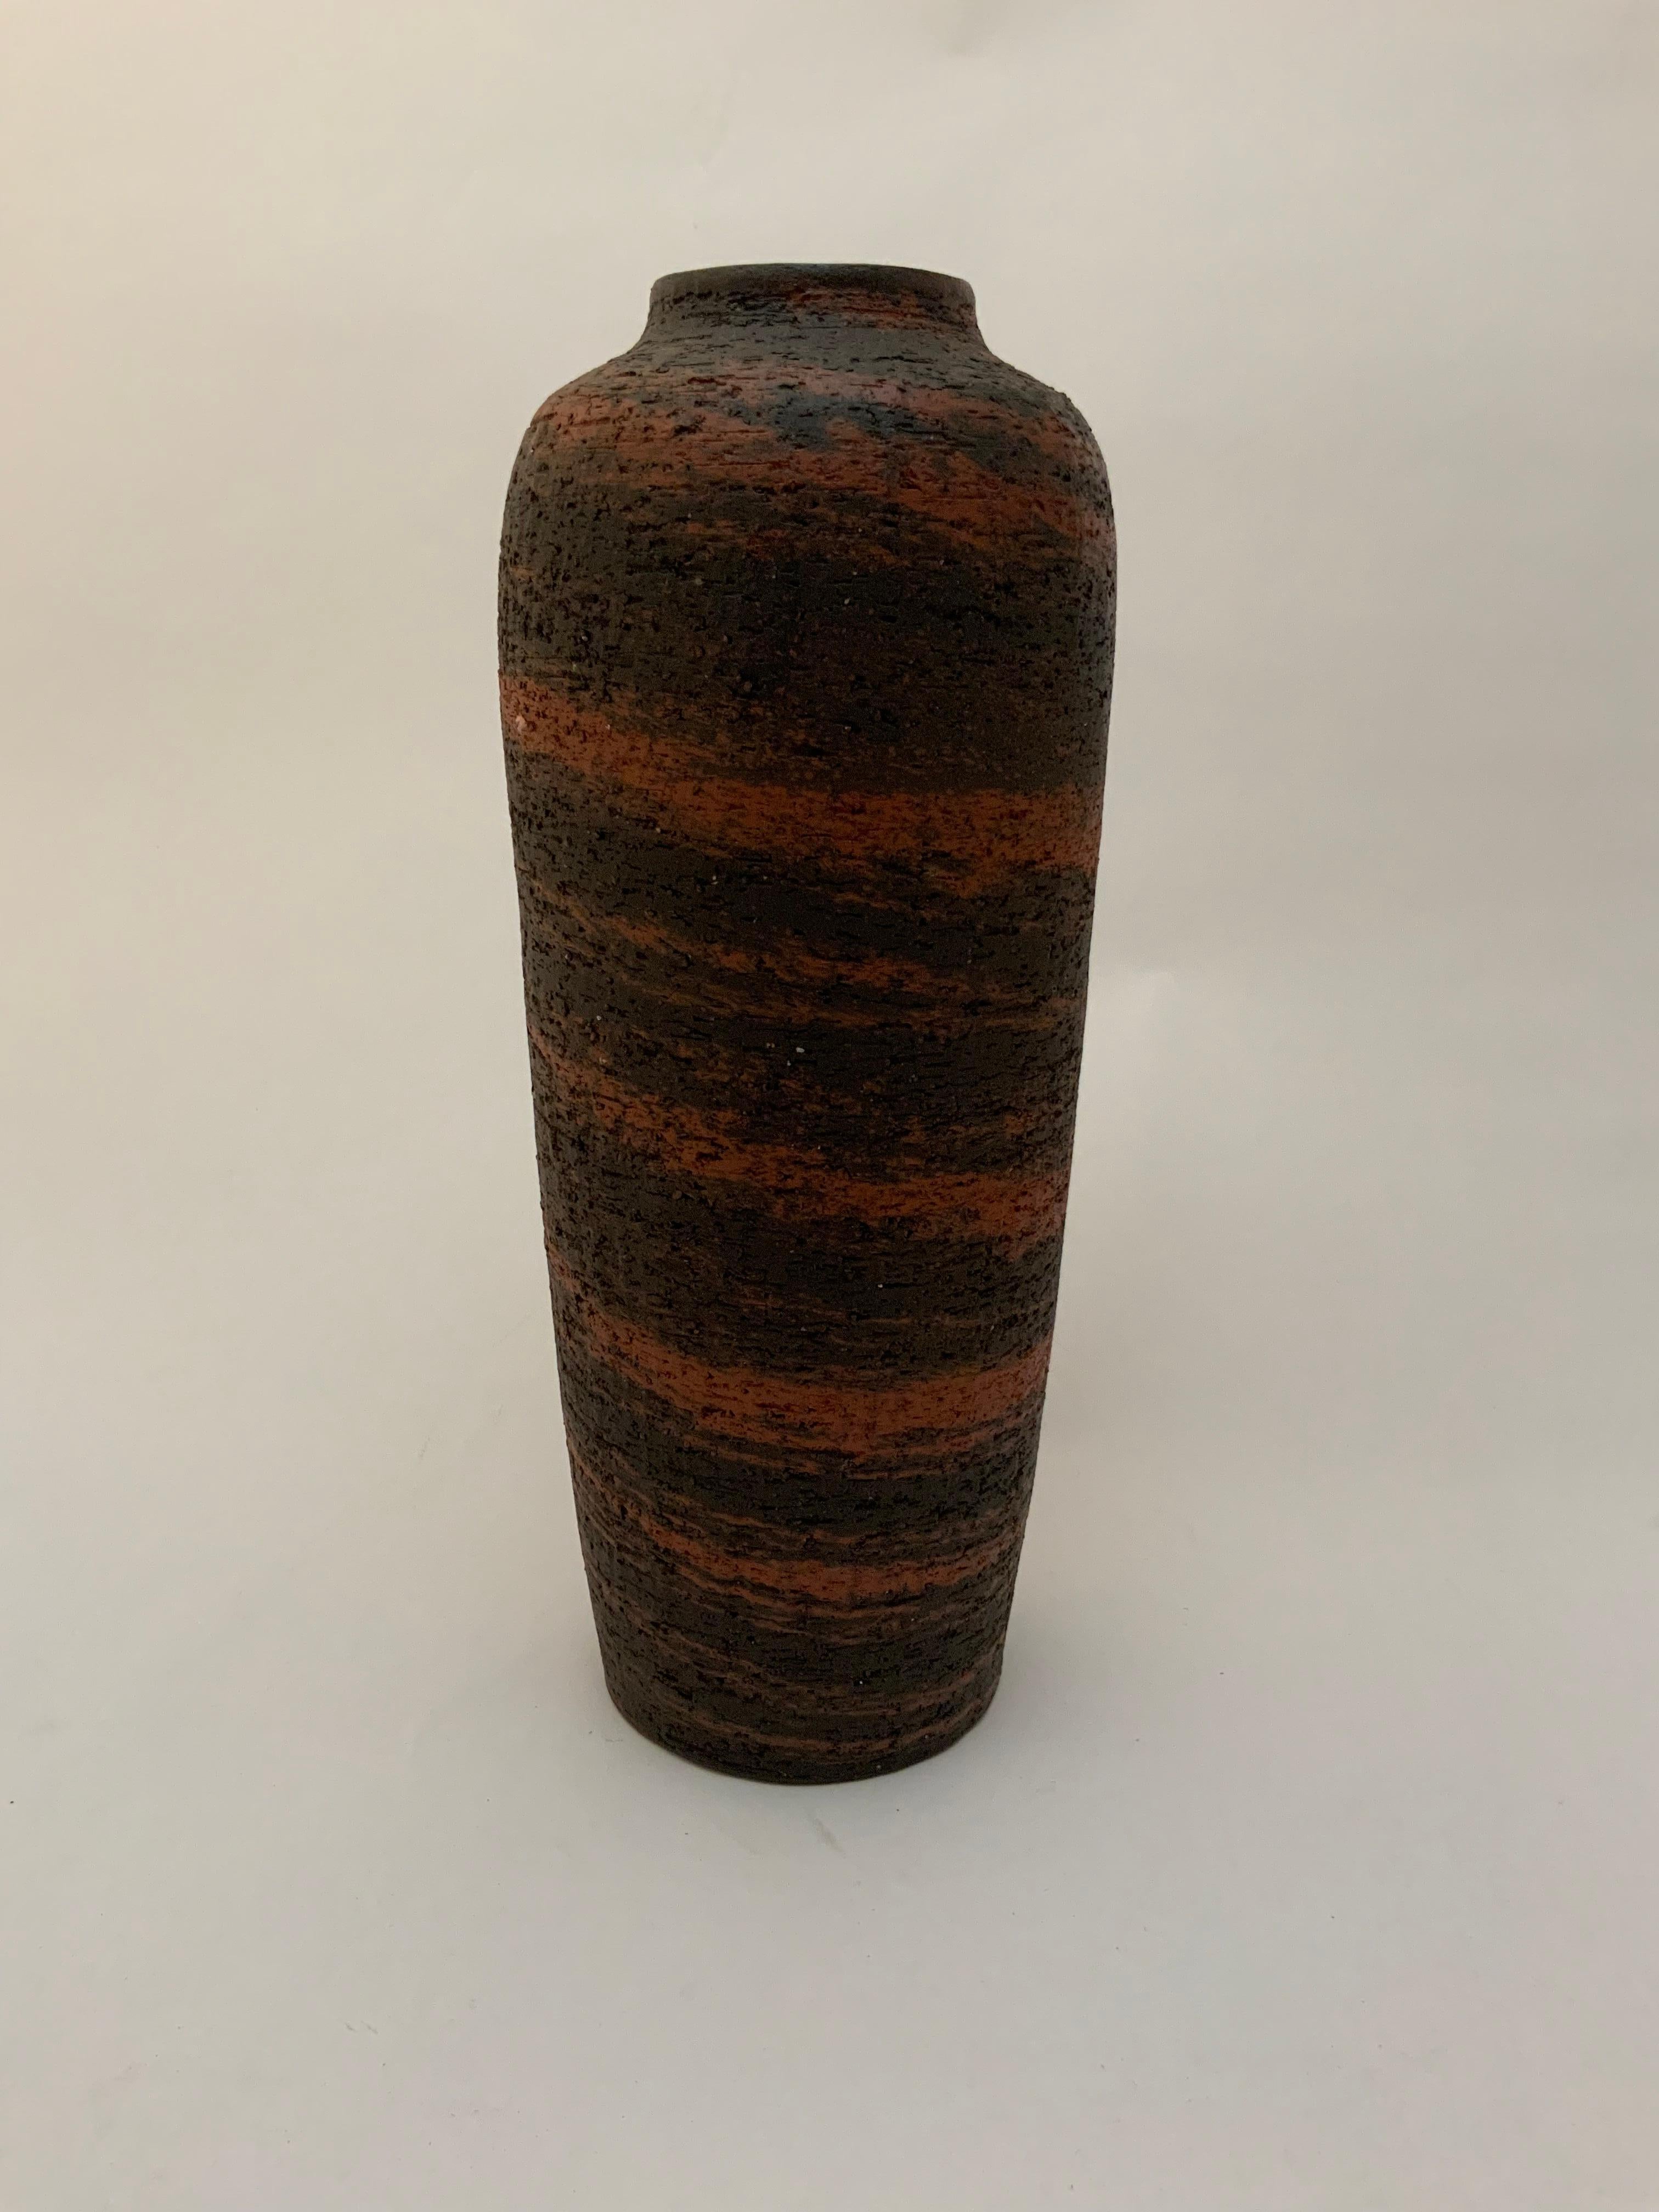 Tall pottery vase by Gunnar Nylund (1914-1997) for Nymolle, Denmark. Early, tall and beautiful stoneware matte glazed vase. Fully signed on the bottom. Excellent original condition.

Approximately measures 10” high x 4” diameter.